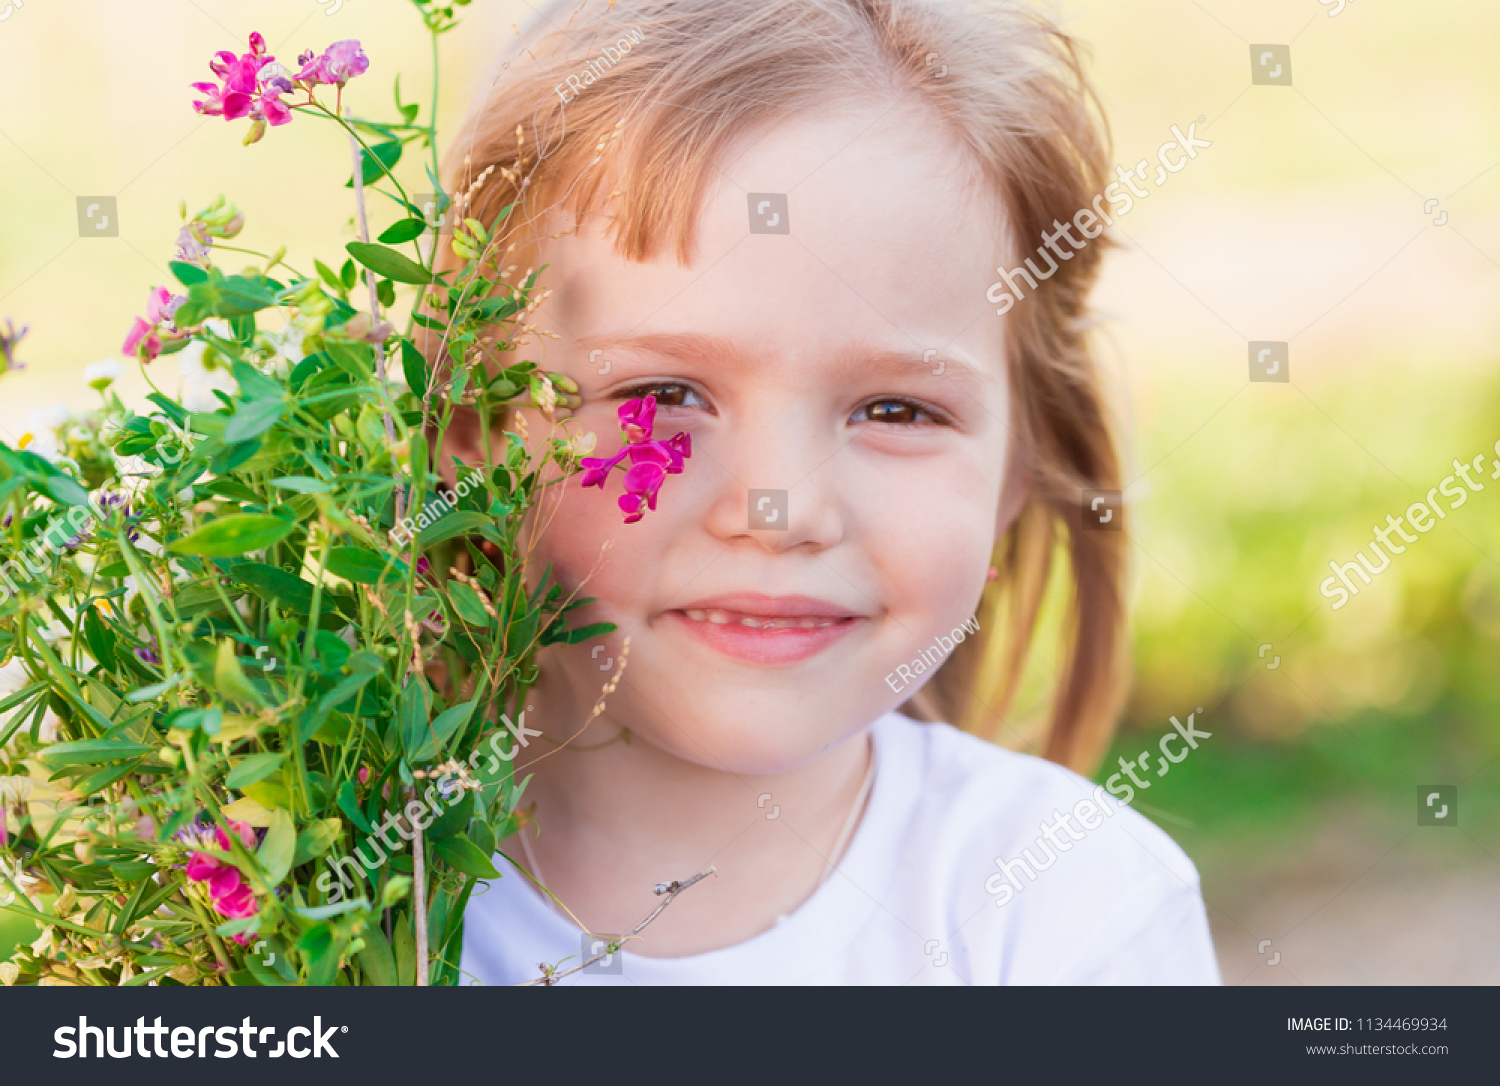 1. Tanish Blonde Hair Girl - Stock Photos and Images - wide 8